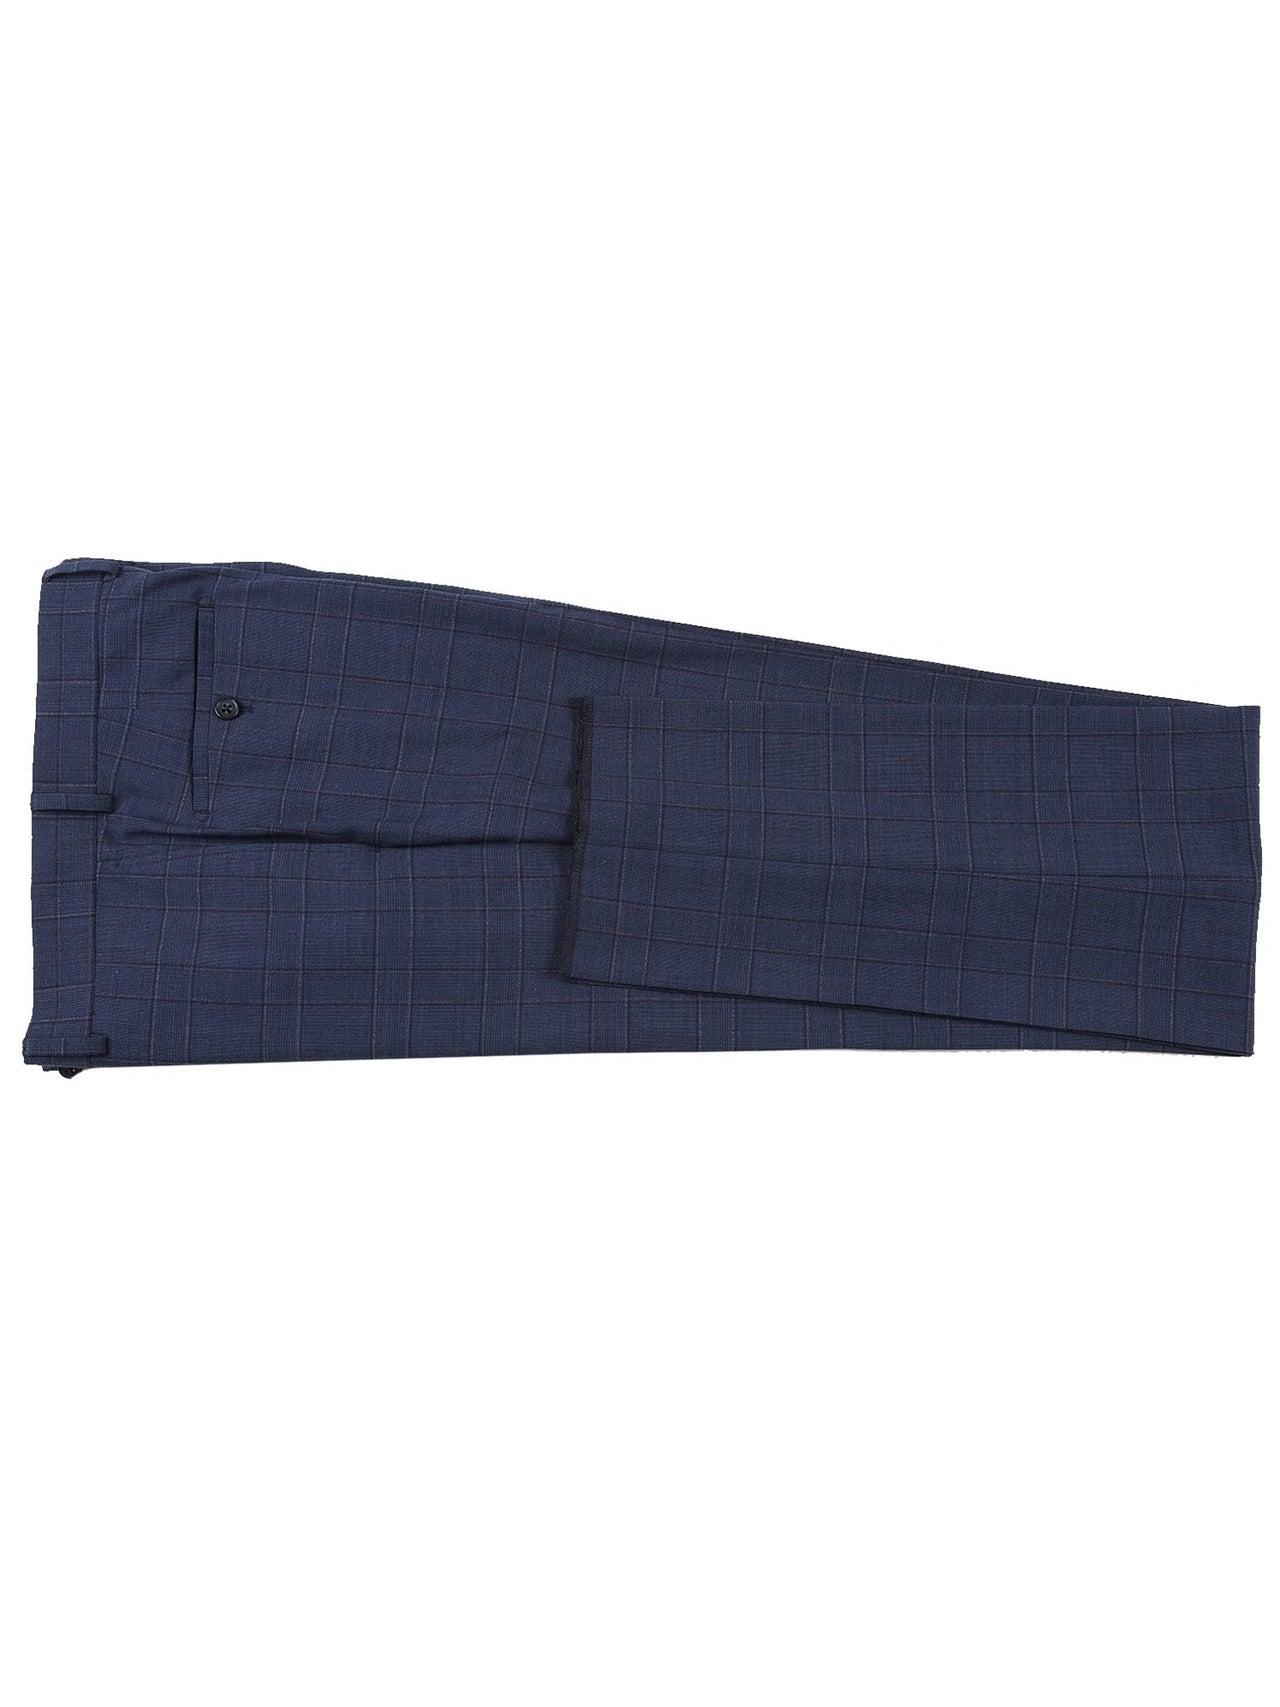 English Laundry Slim Fit Prussian Blue Window Pane Check Wool Suit